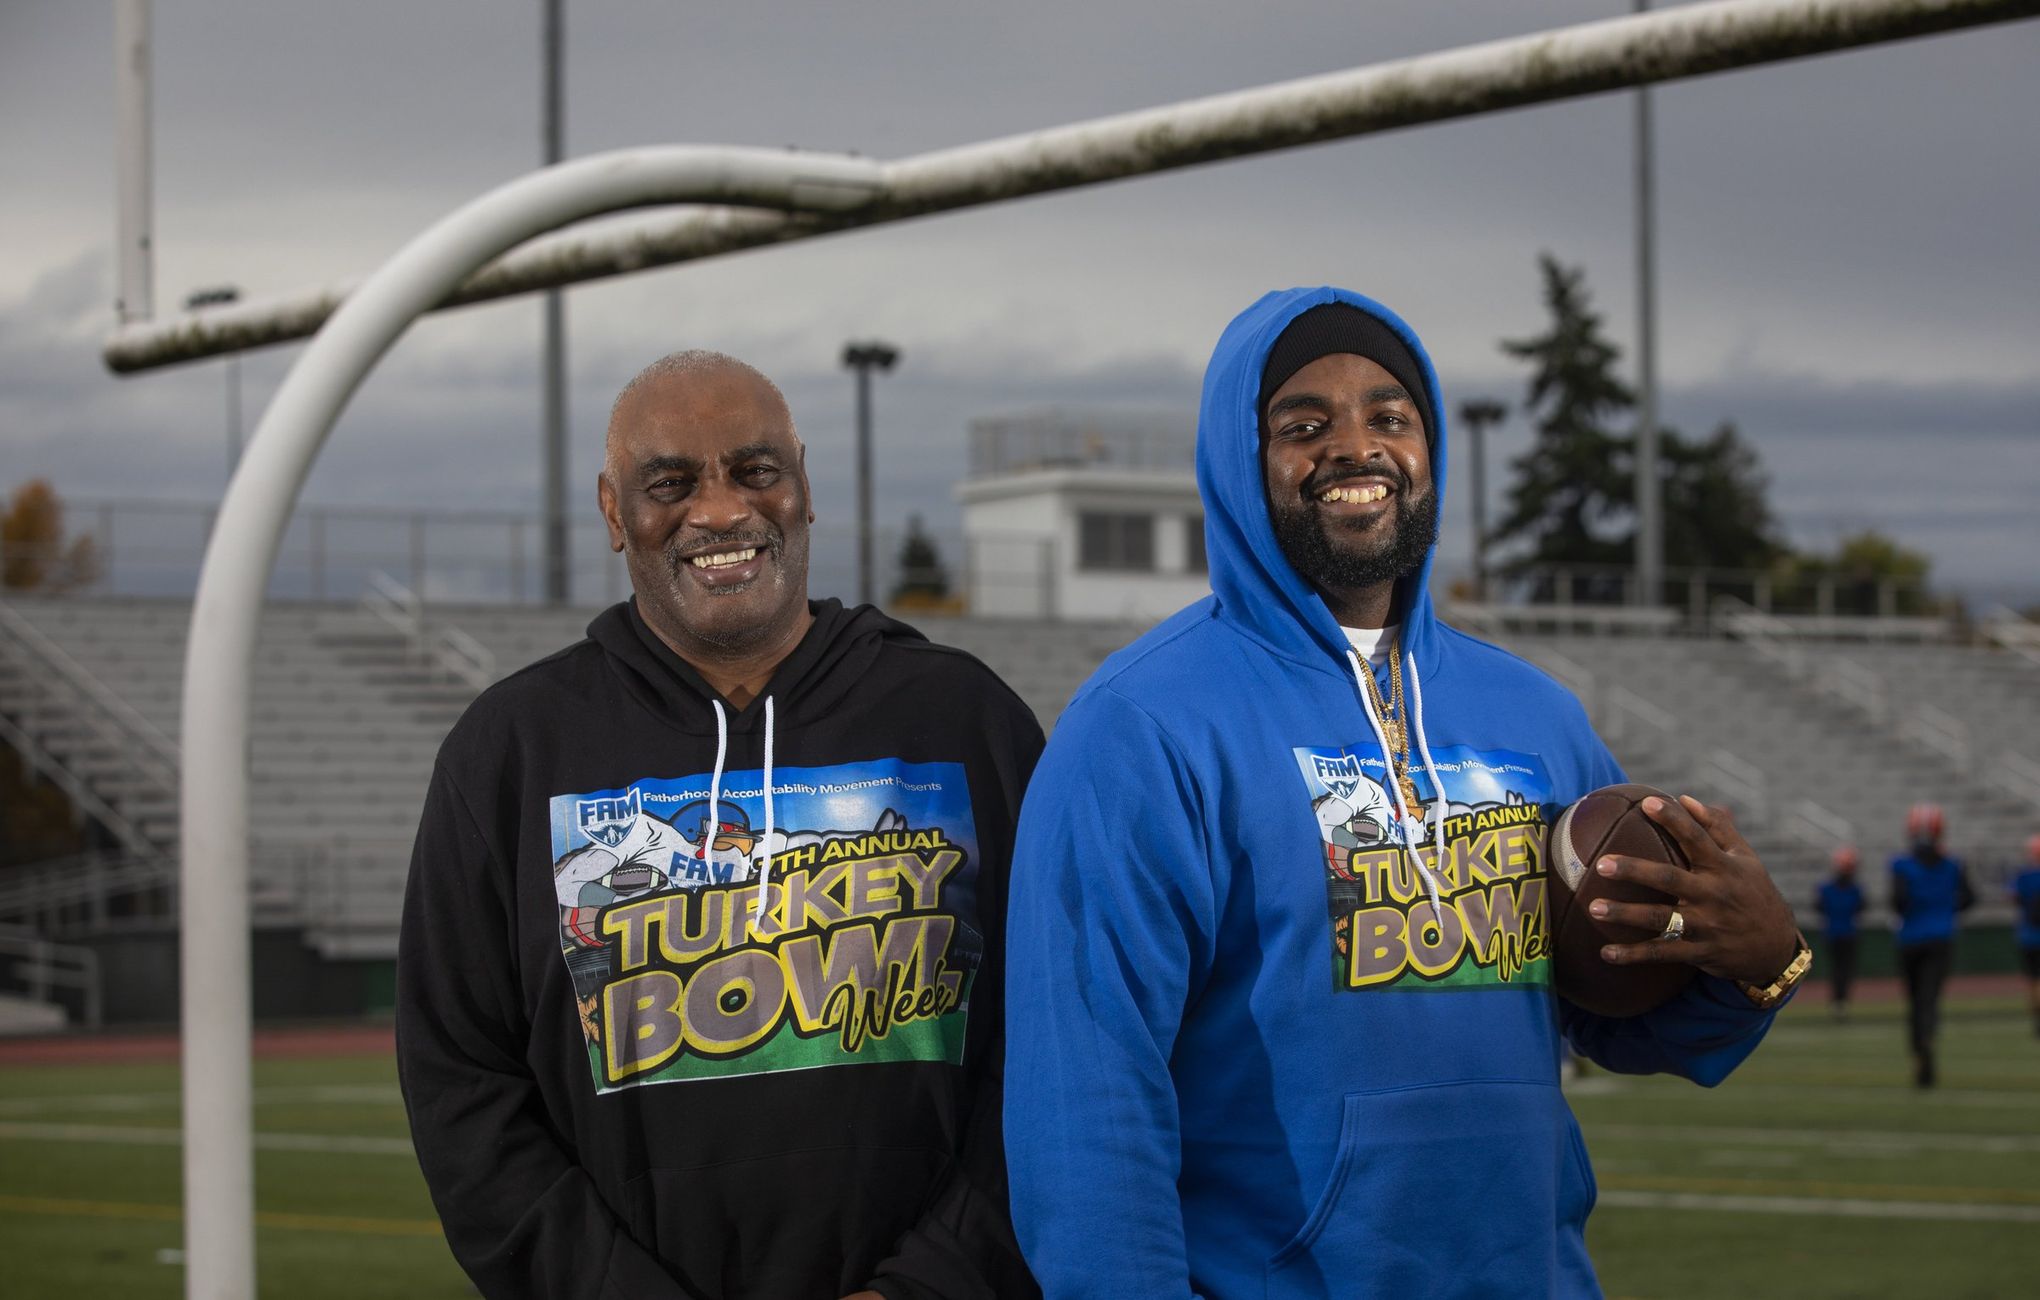 We hosted the 1st ever Coaches vs. Parents Turkey Bowl at Eastern